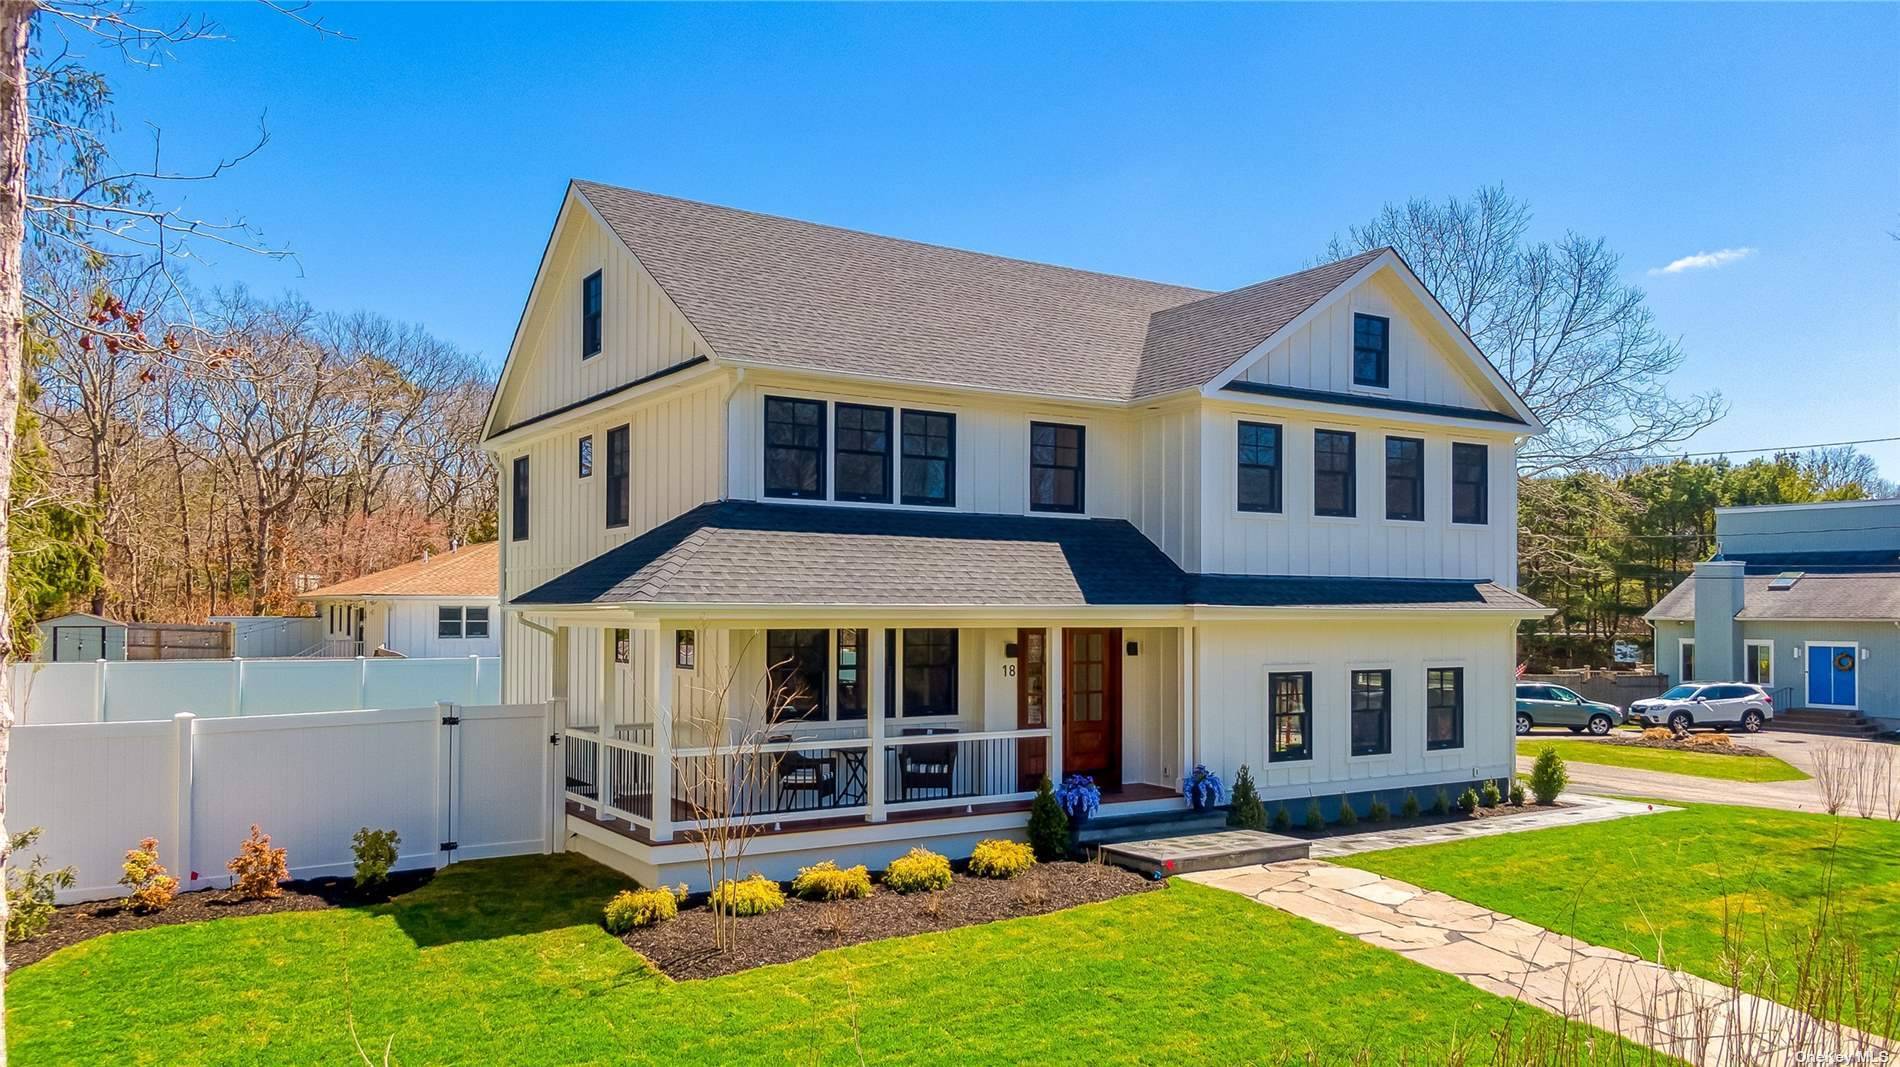 With 40 Years of Custom Home Building Experience, Indisputable Quality amp ; Attention to Detail Awaits the Discerning Buyer Seeking Winter 2024 Occupancy in this TO BE BUILT Hamptons Luxury ...